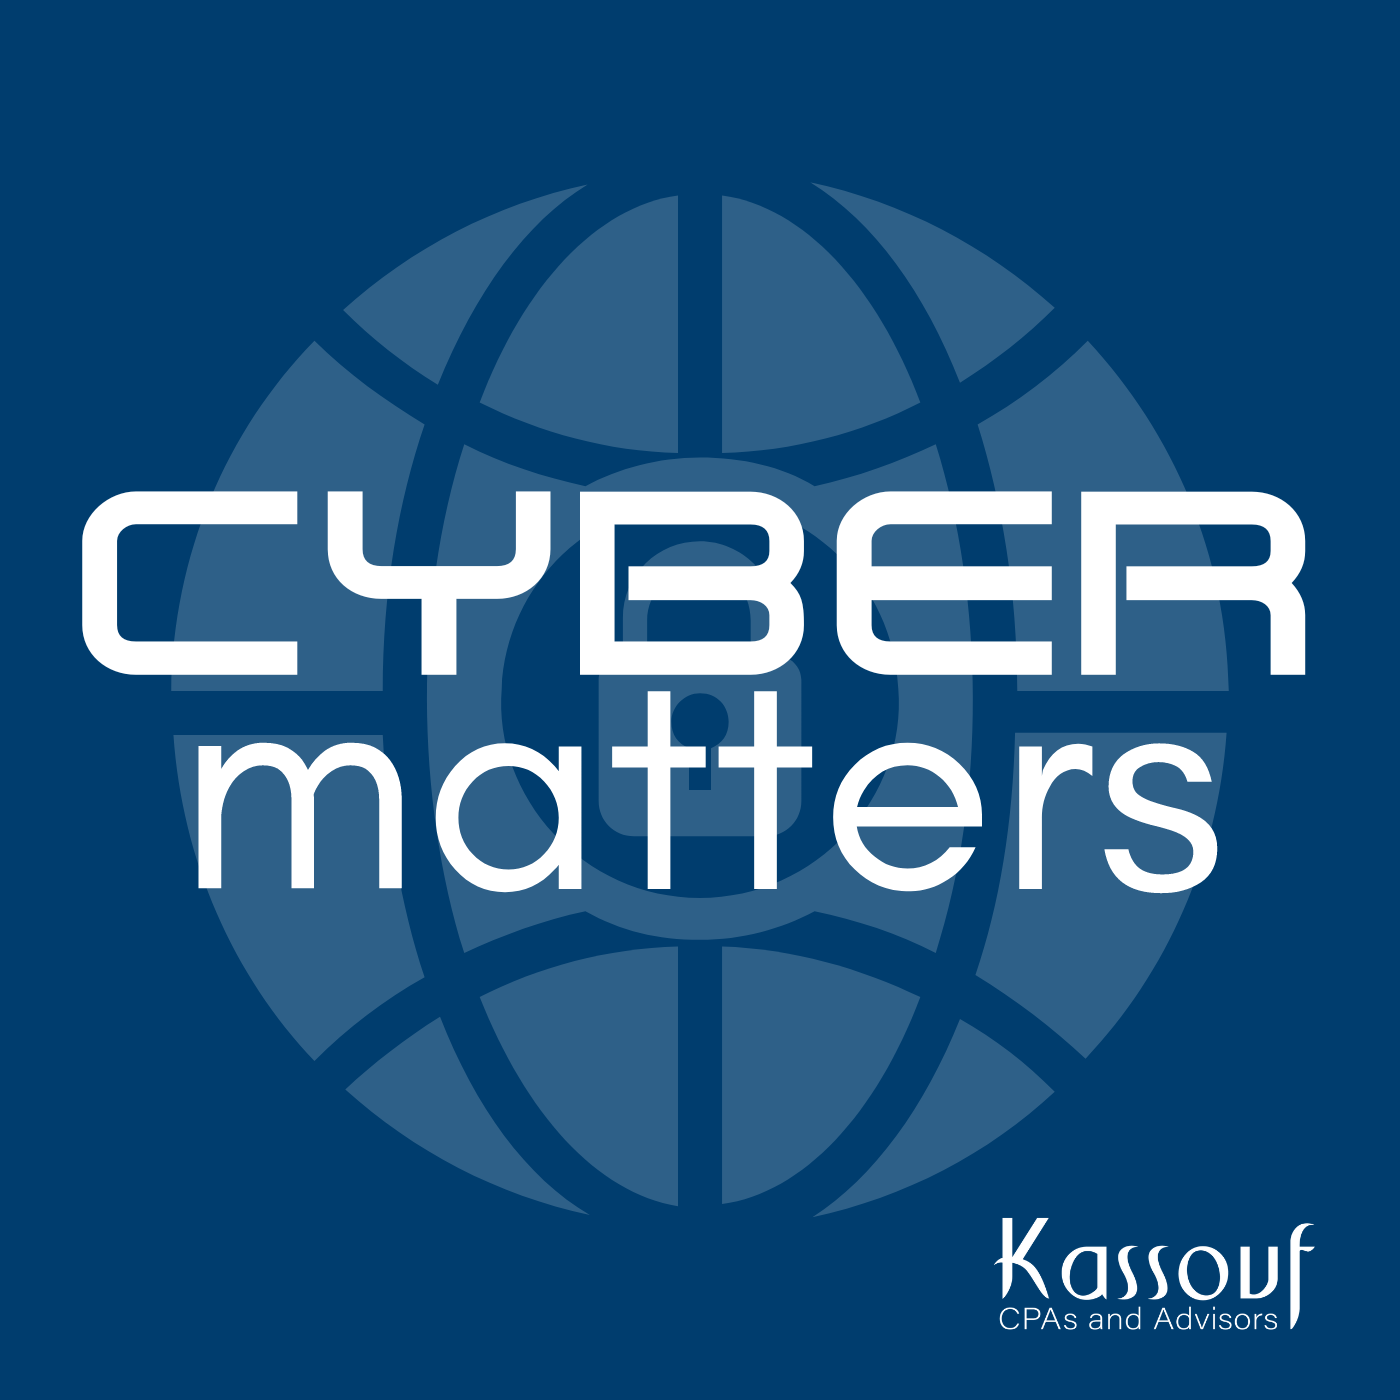 Introducing Cyber Matters, a new show presented by the Kassouf Podcast Network